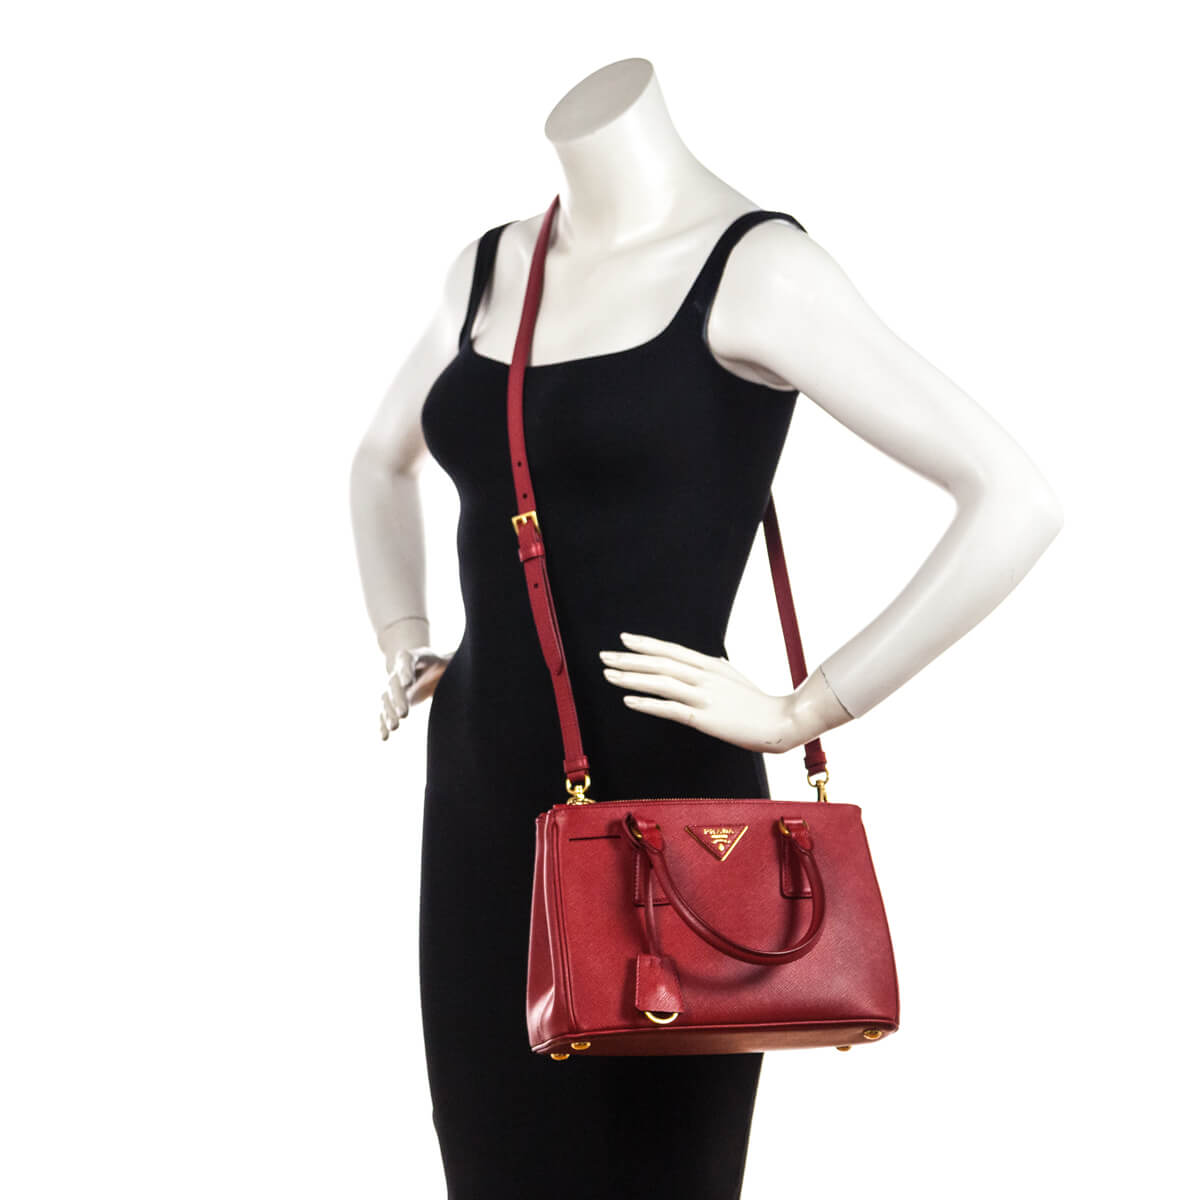 Outfit ideas - How to wear Prada Saffiano Small Double-Handle Tote Bag, Red  (Fuoco) - WEAR